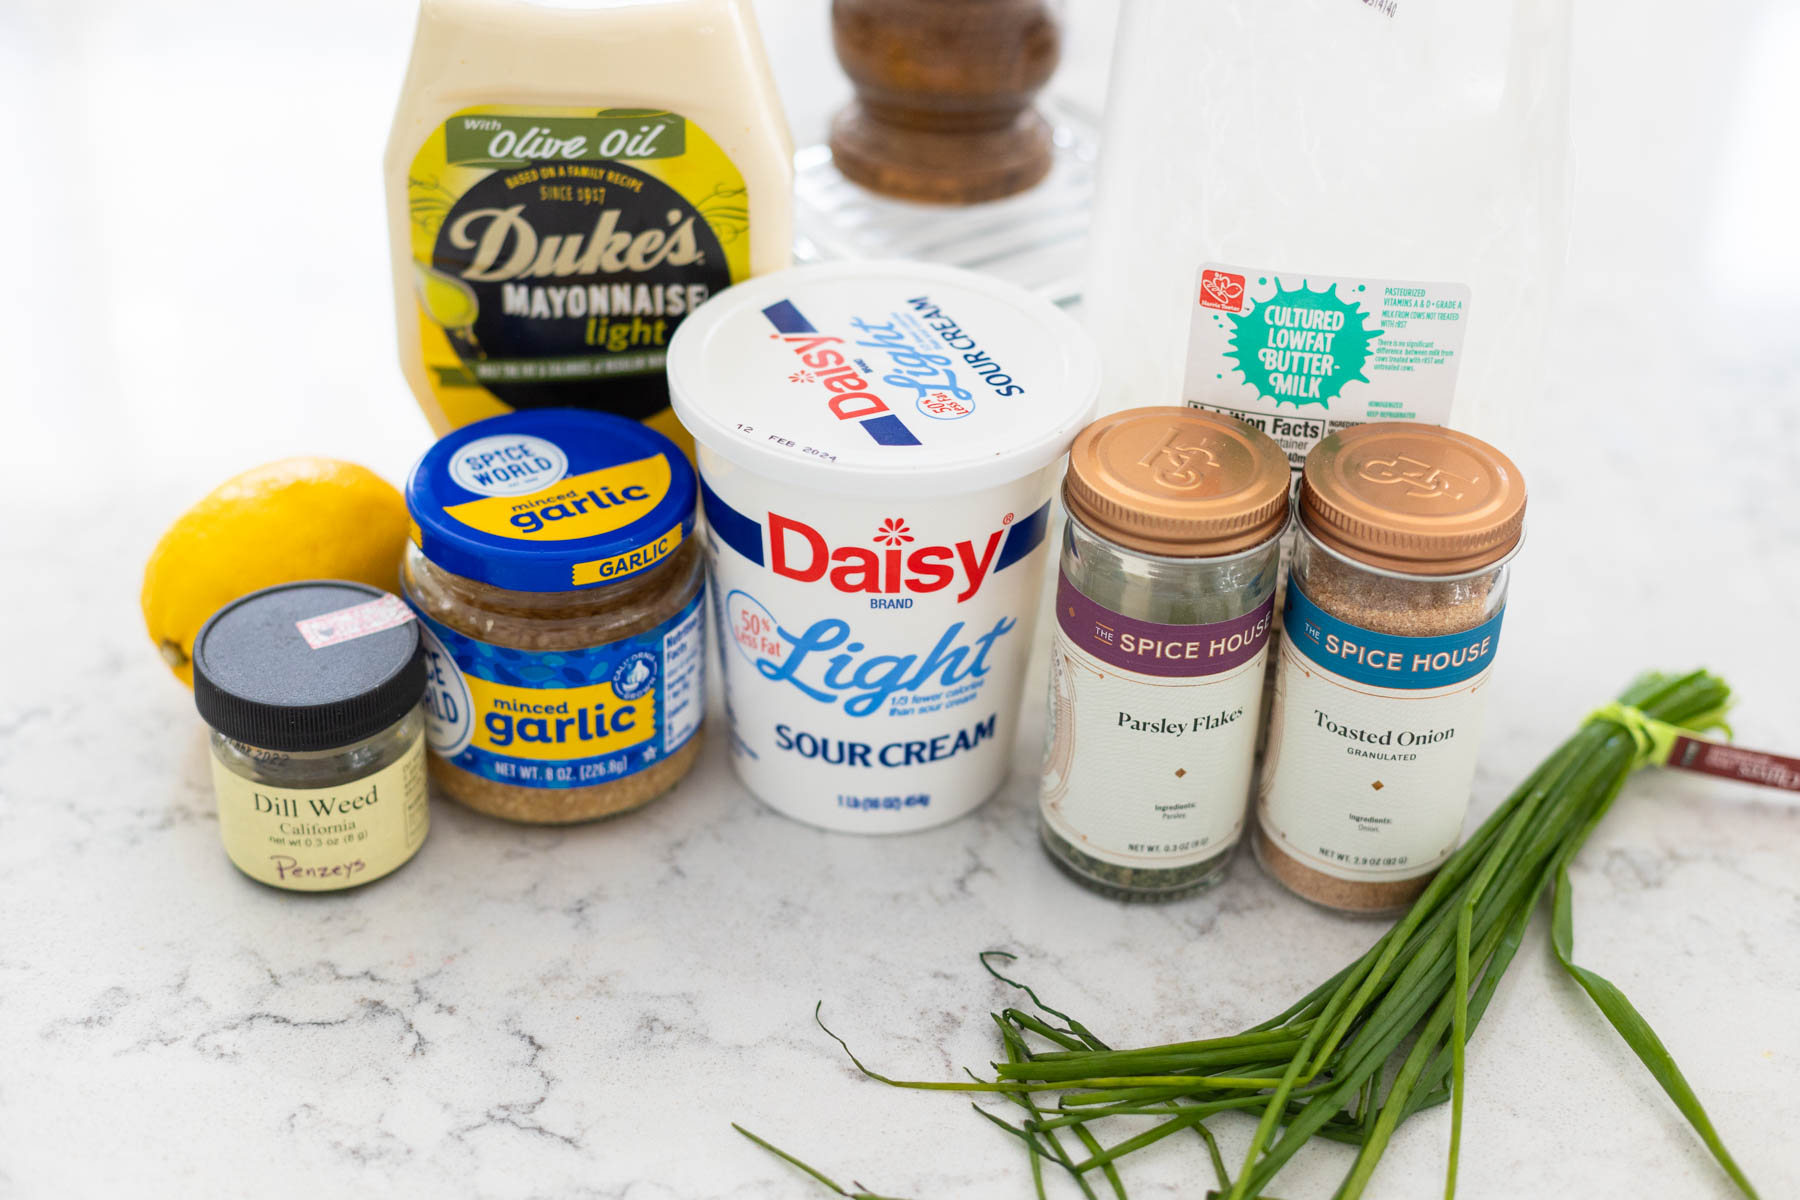 The ingredients to make ranch dip are on the counter.